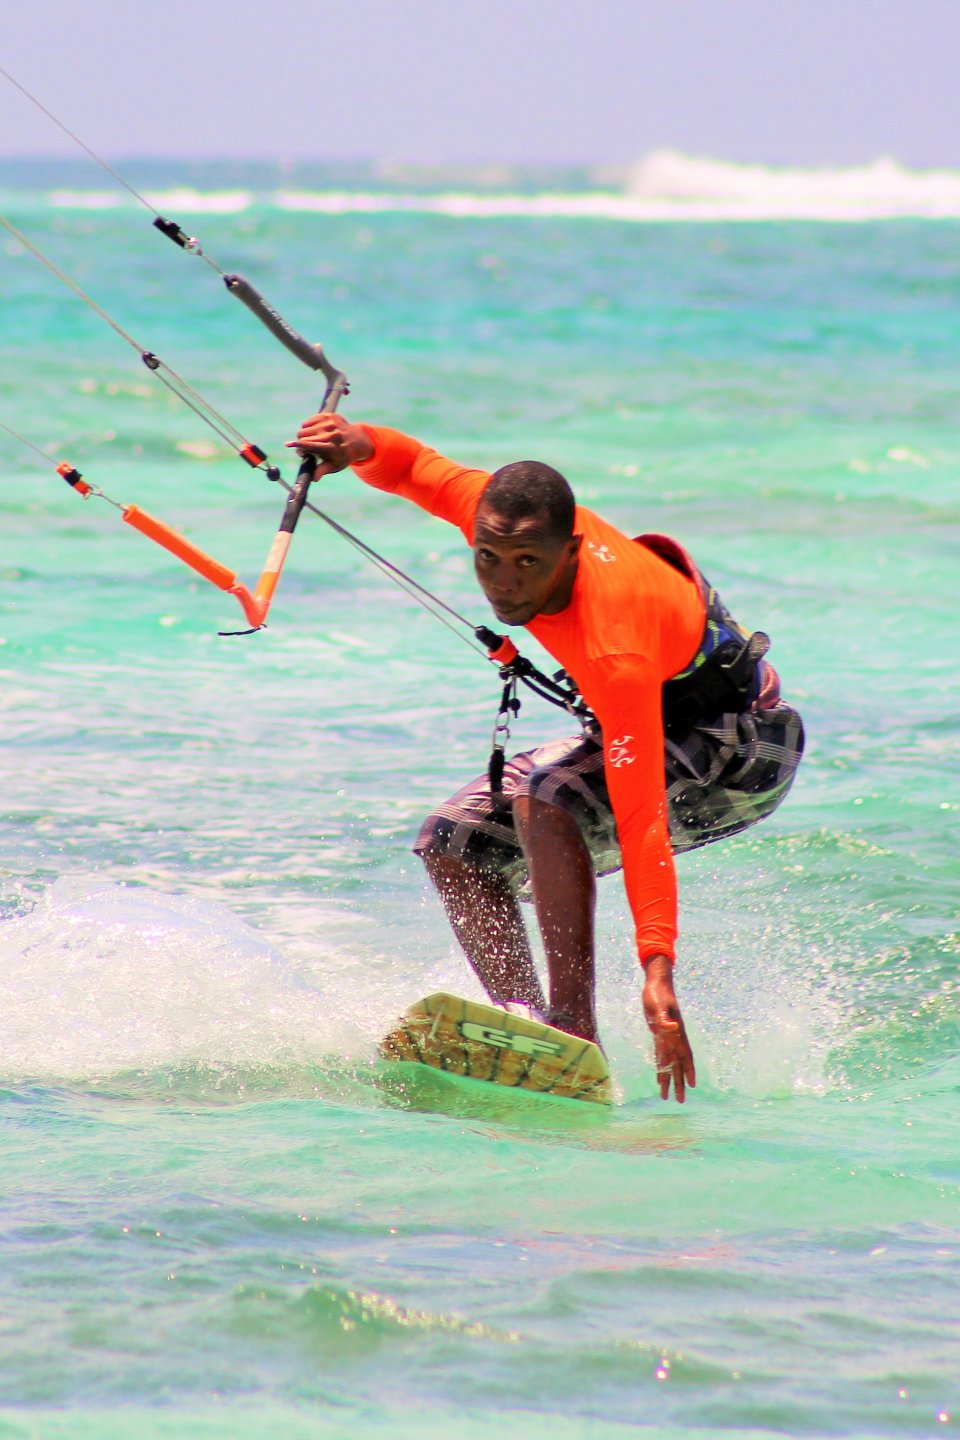 Kite Surfing with Sand and Sea Water Sports